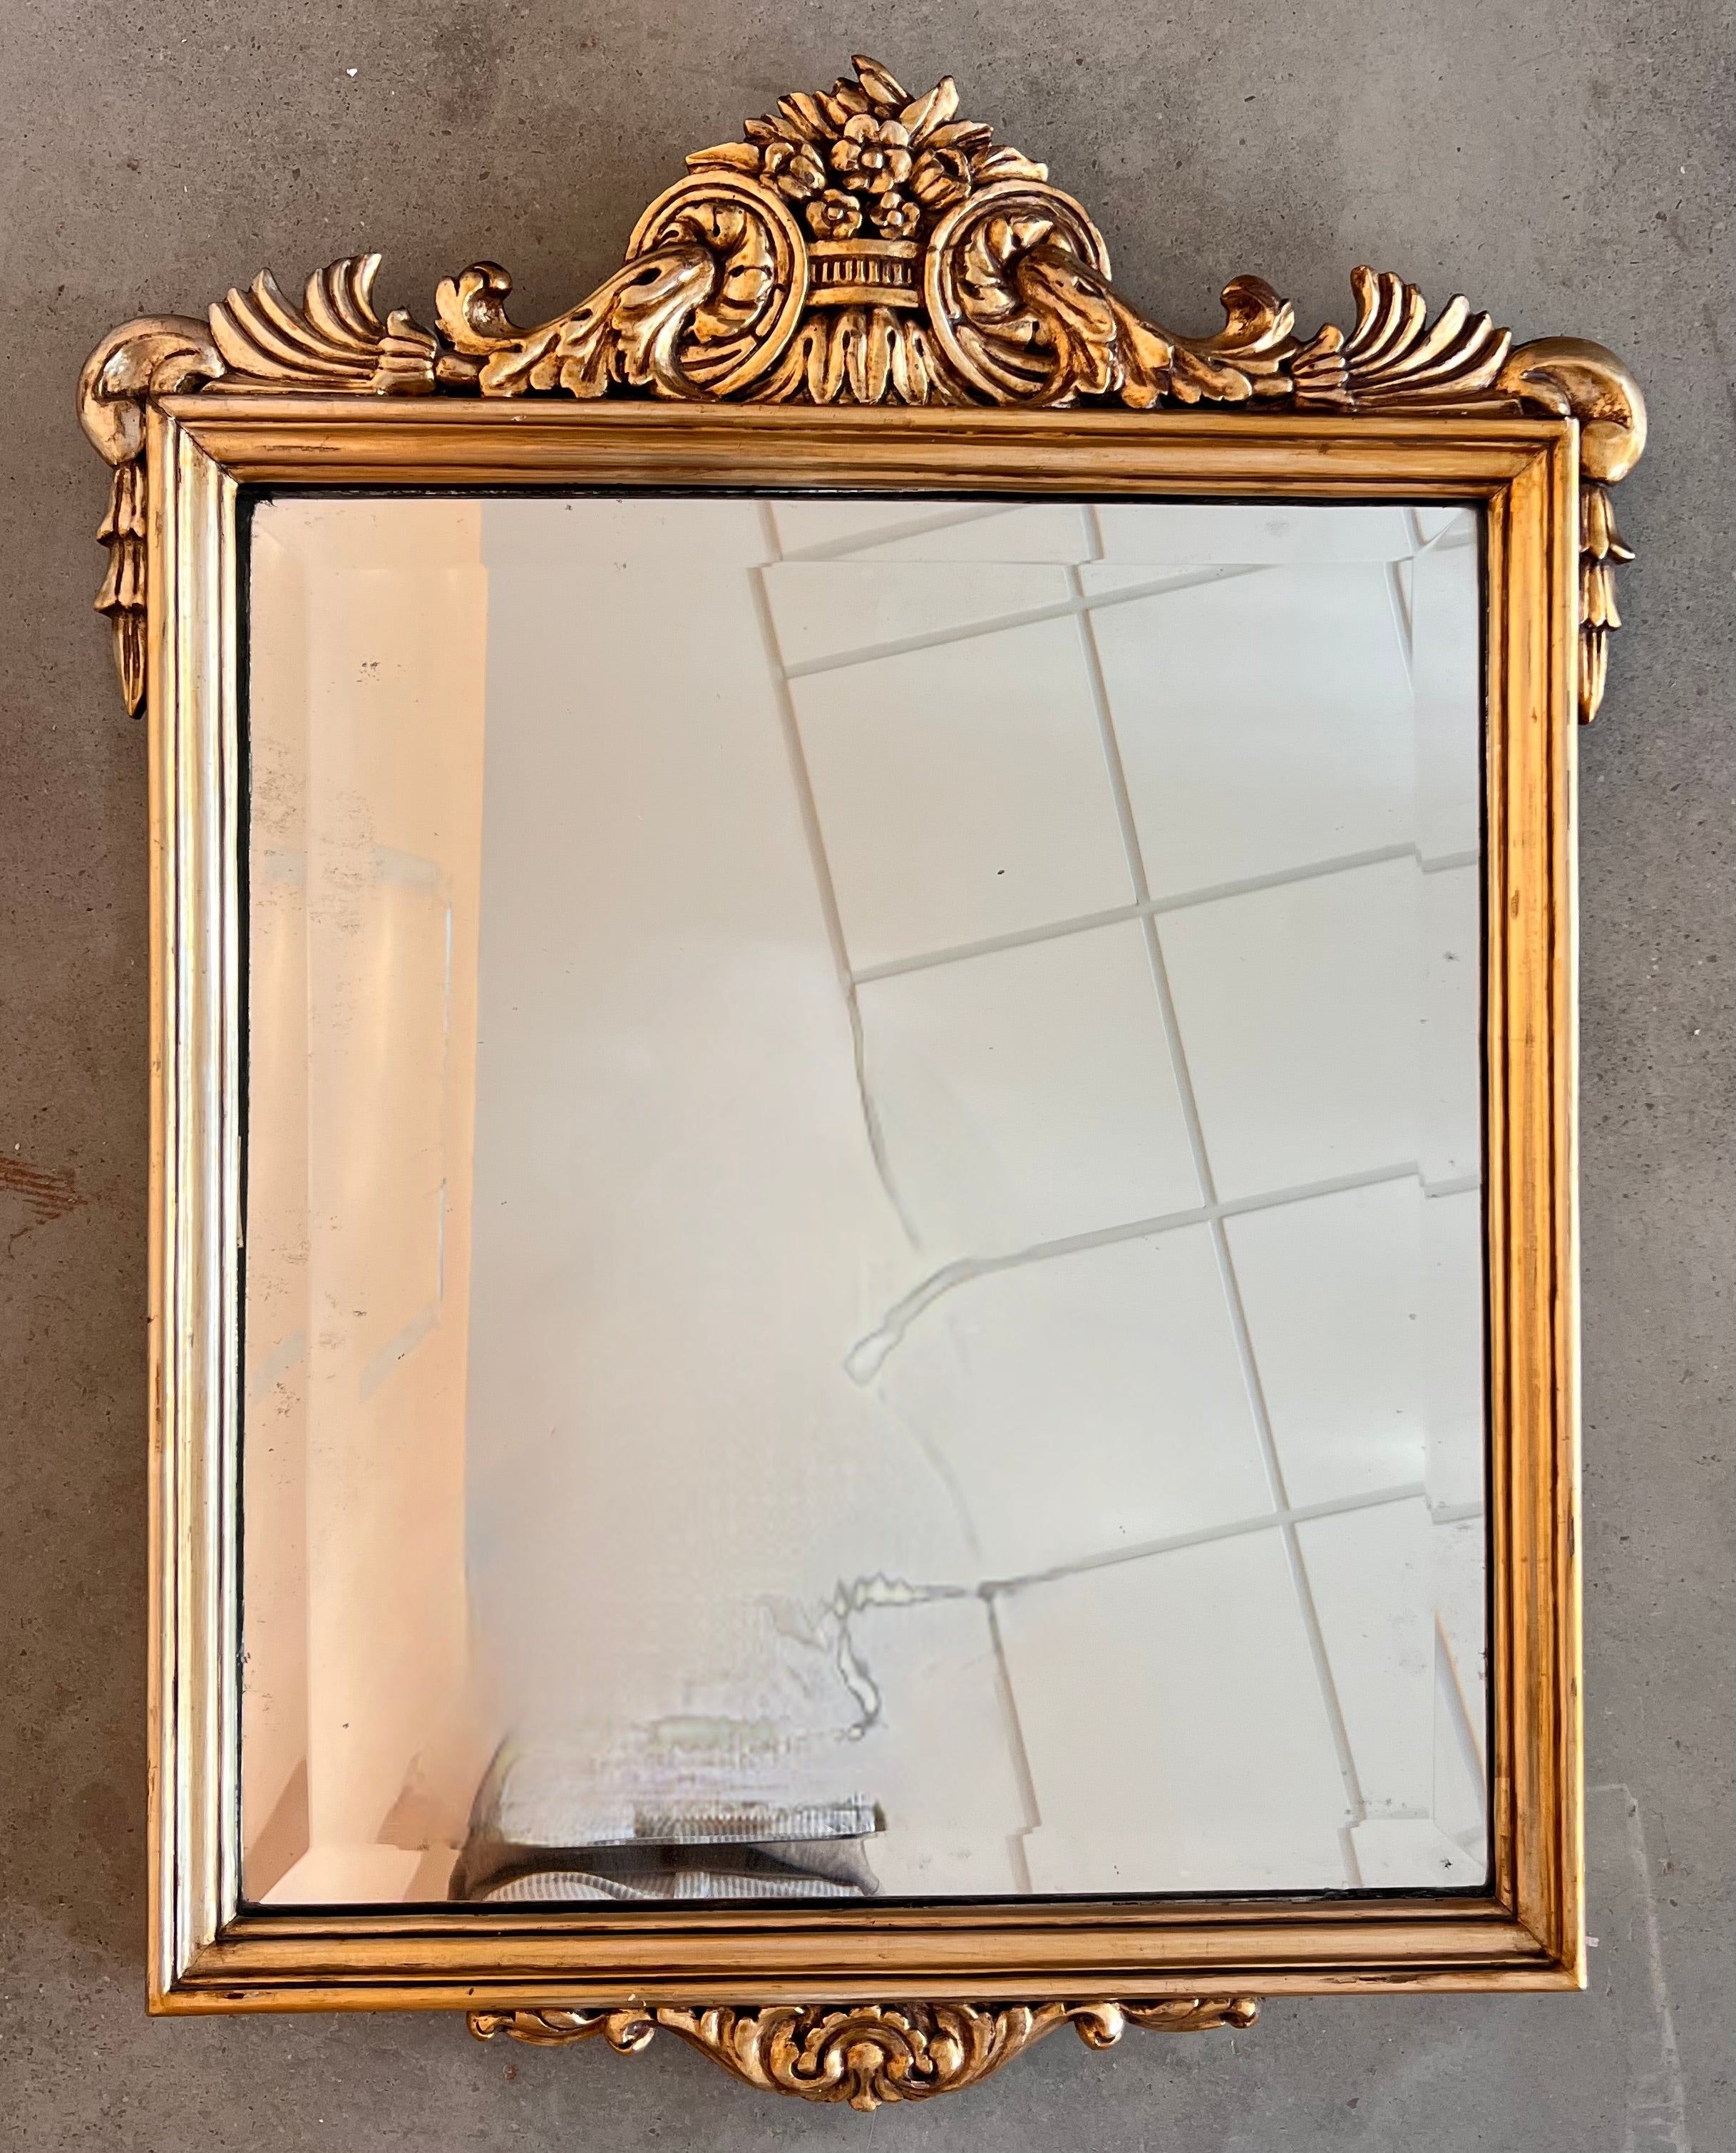 20th French Empire Period Carved Gilt Wood Rectangular Mirror with Crest